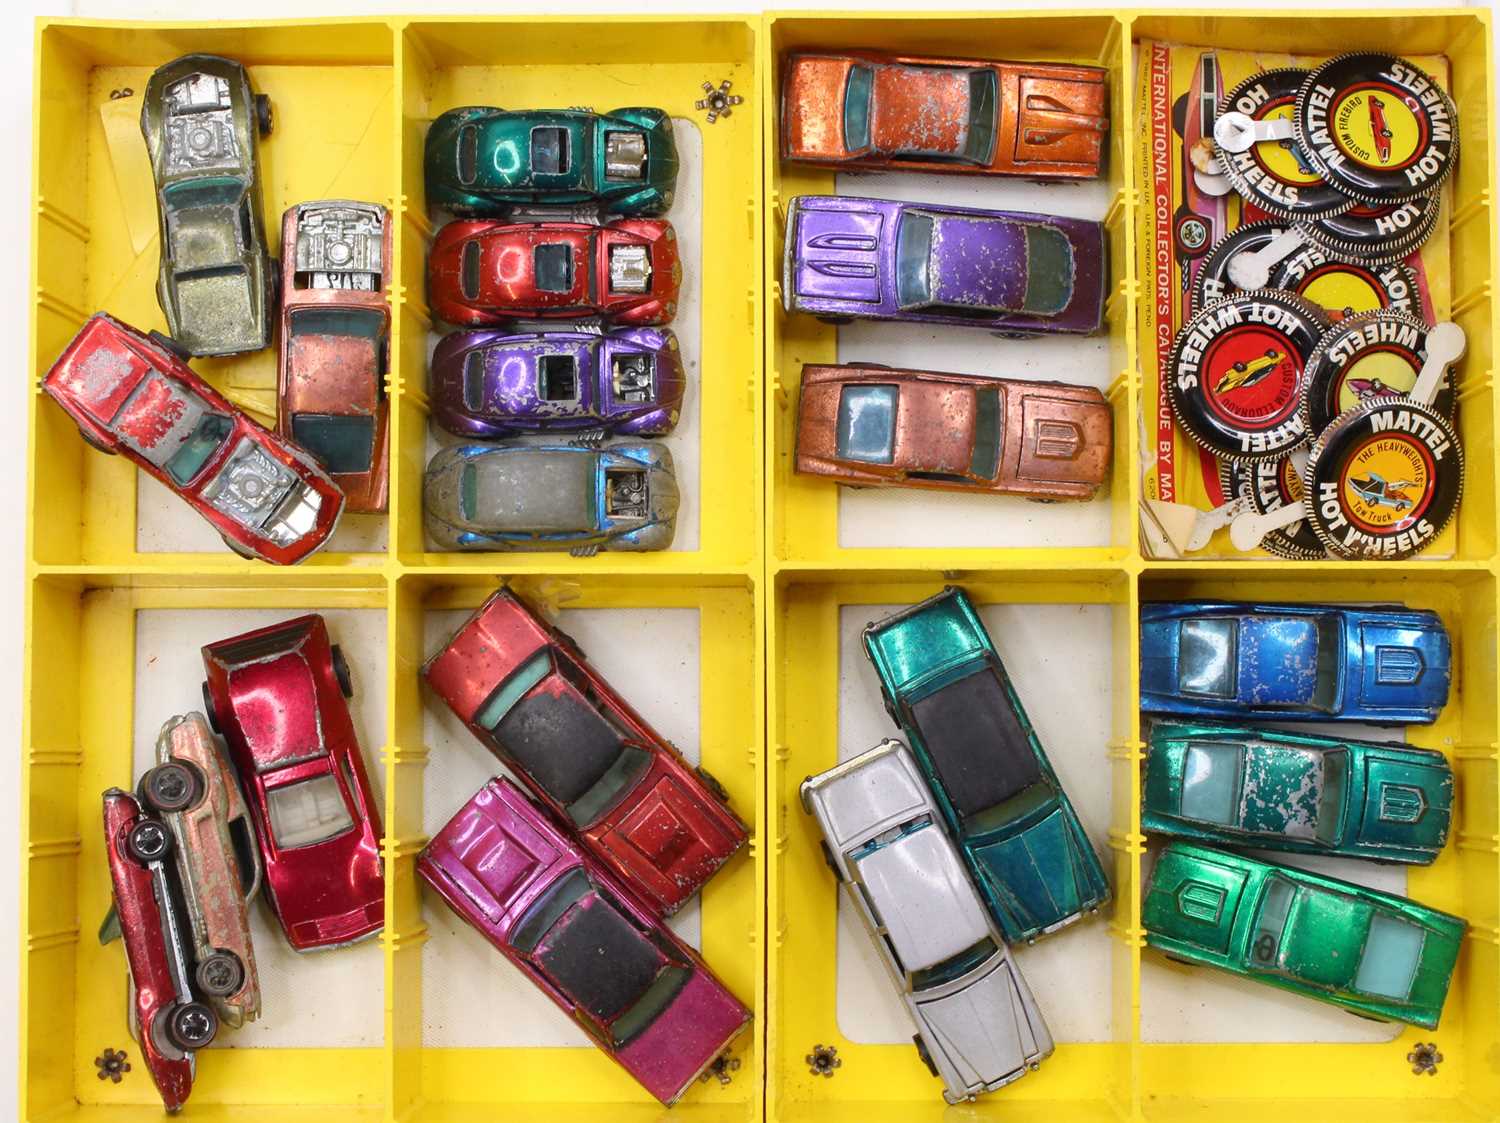 A Hot Wheels Redlines Collectors Carry Case together with a selection of vehicles and original